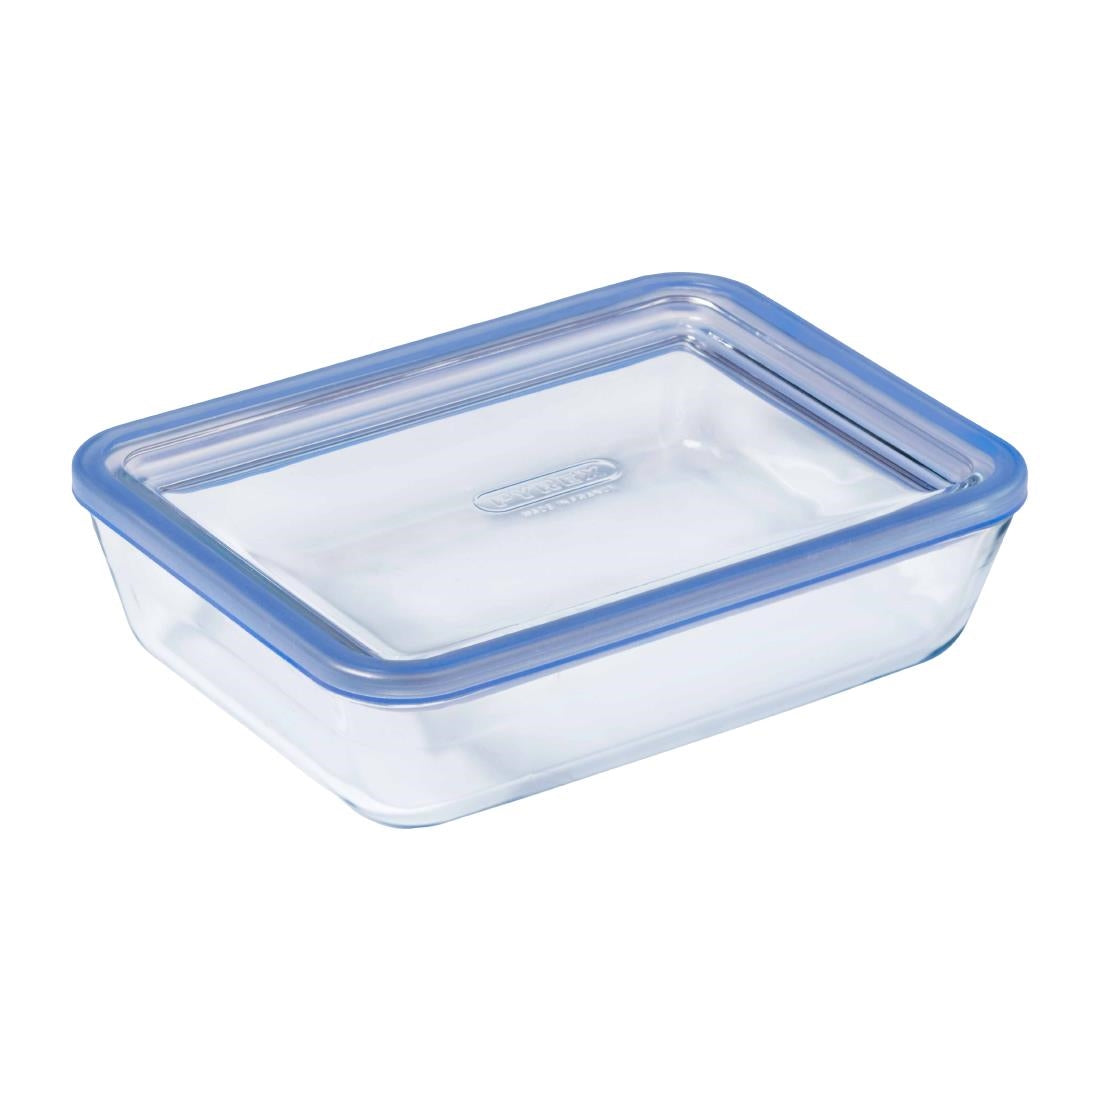 CZ080 Pyrex Pure Glass Food Storage Container 0.8Ltr JD Catering Equipment Solutions Ltd